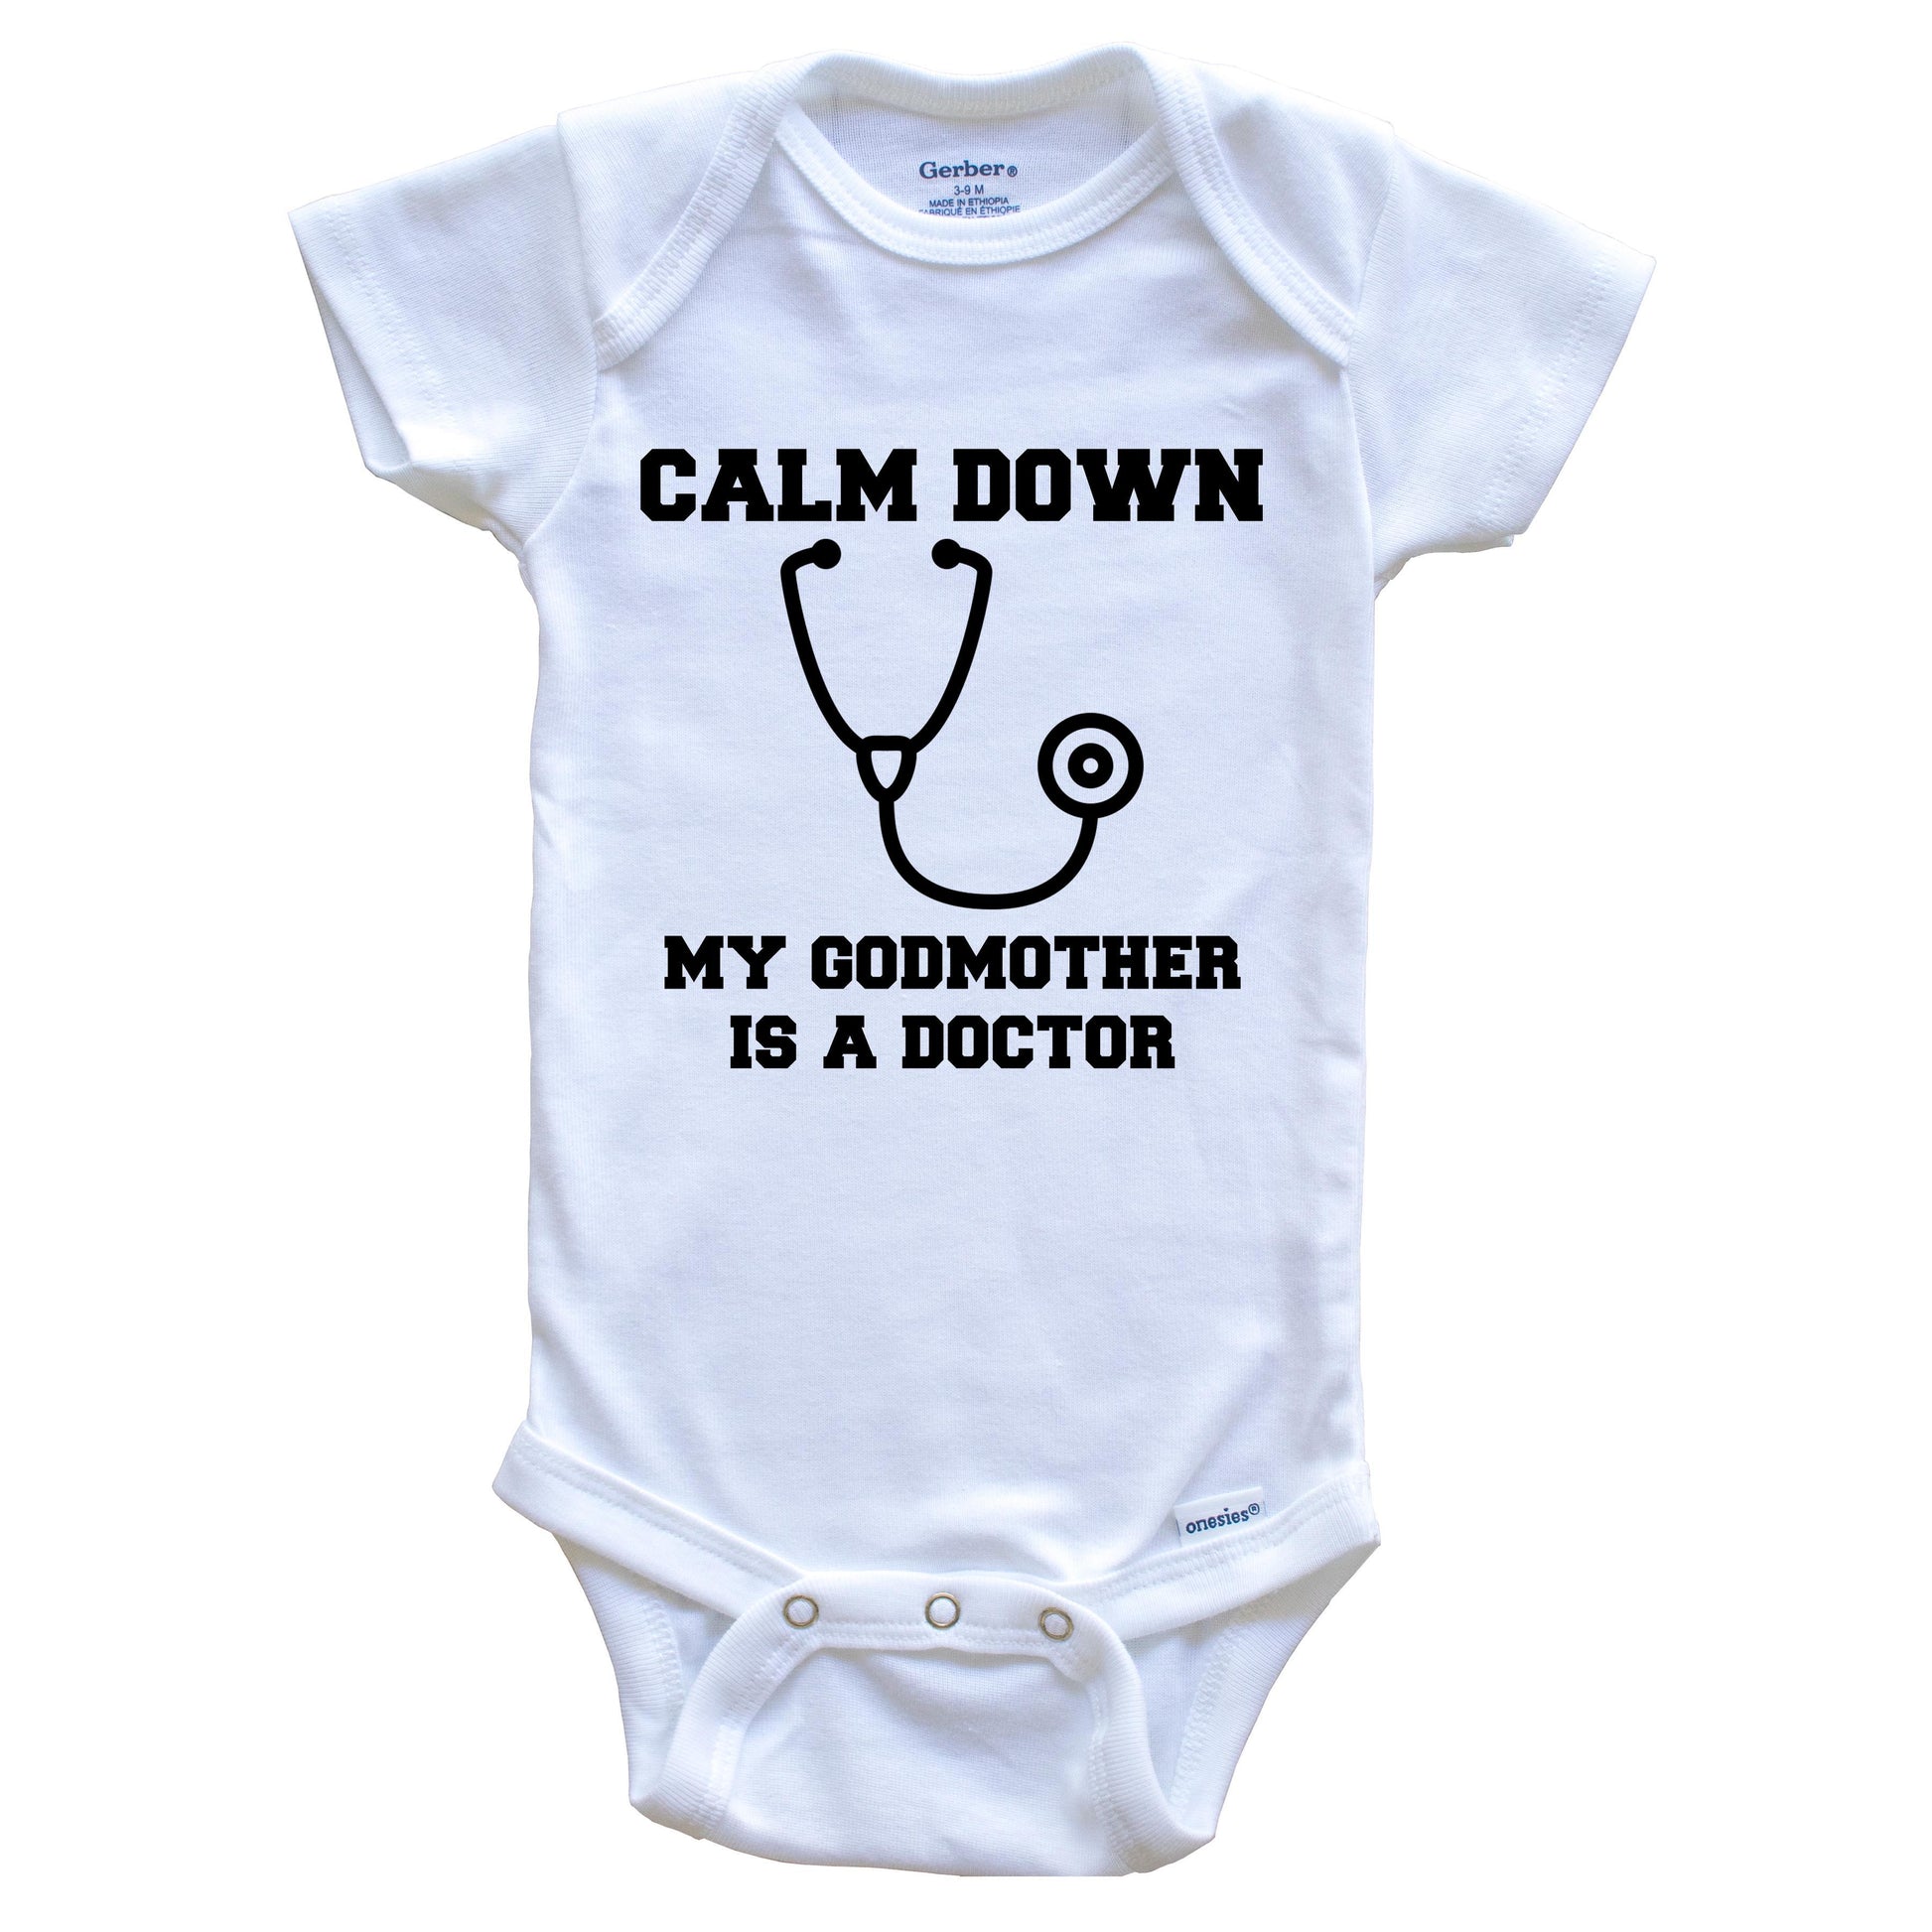 Calm Down My Godmother Is A Doctor Funny Baby Onesie - One Piece Baby Bodysuit